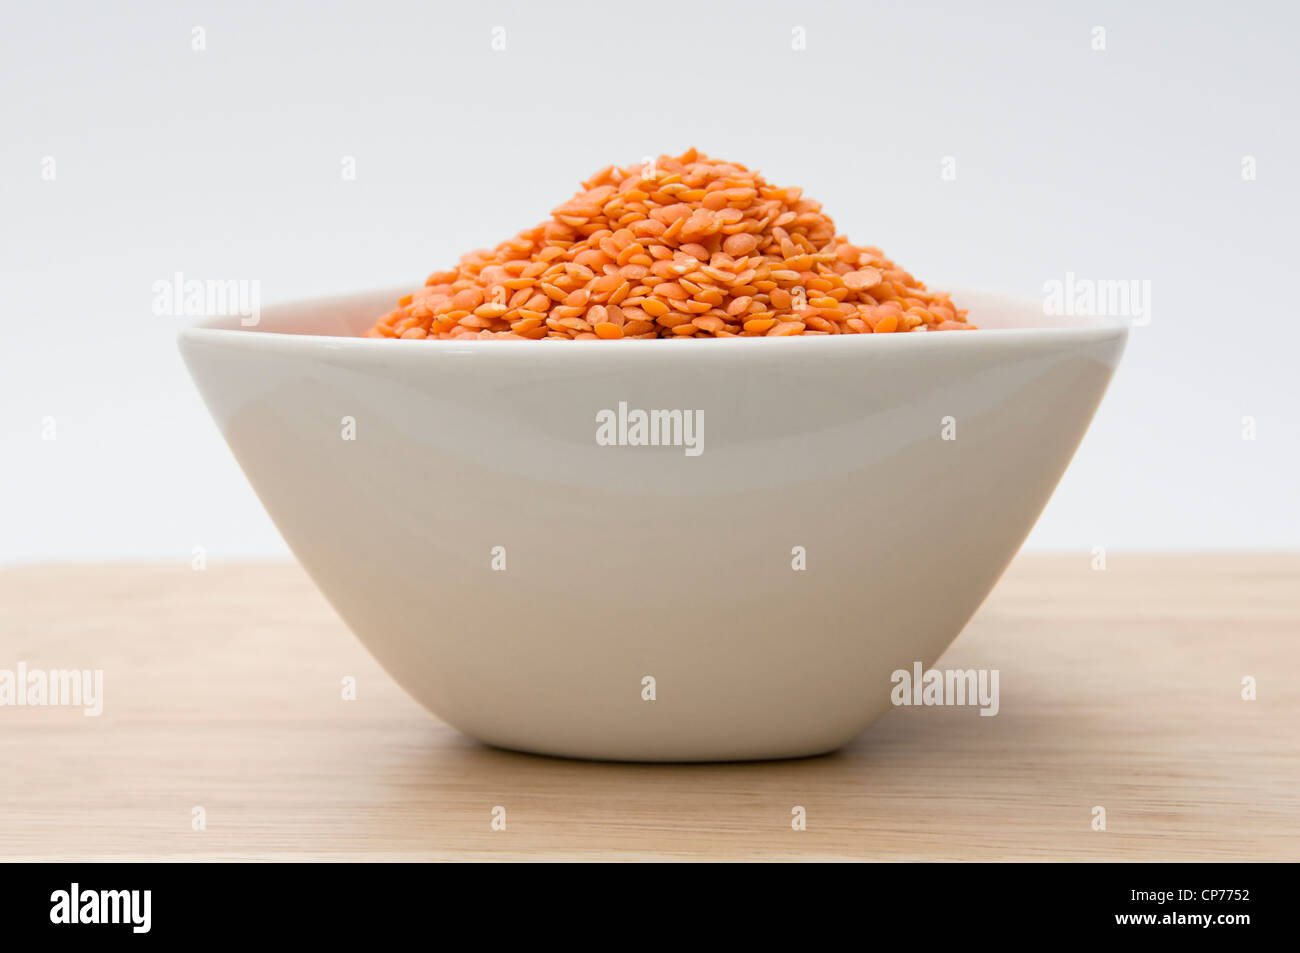 Dried red lentils in white bowl on wooden board against a white background Stock Photo